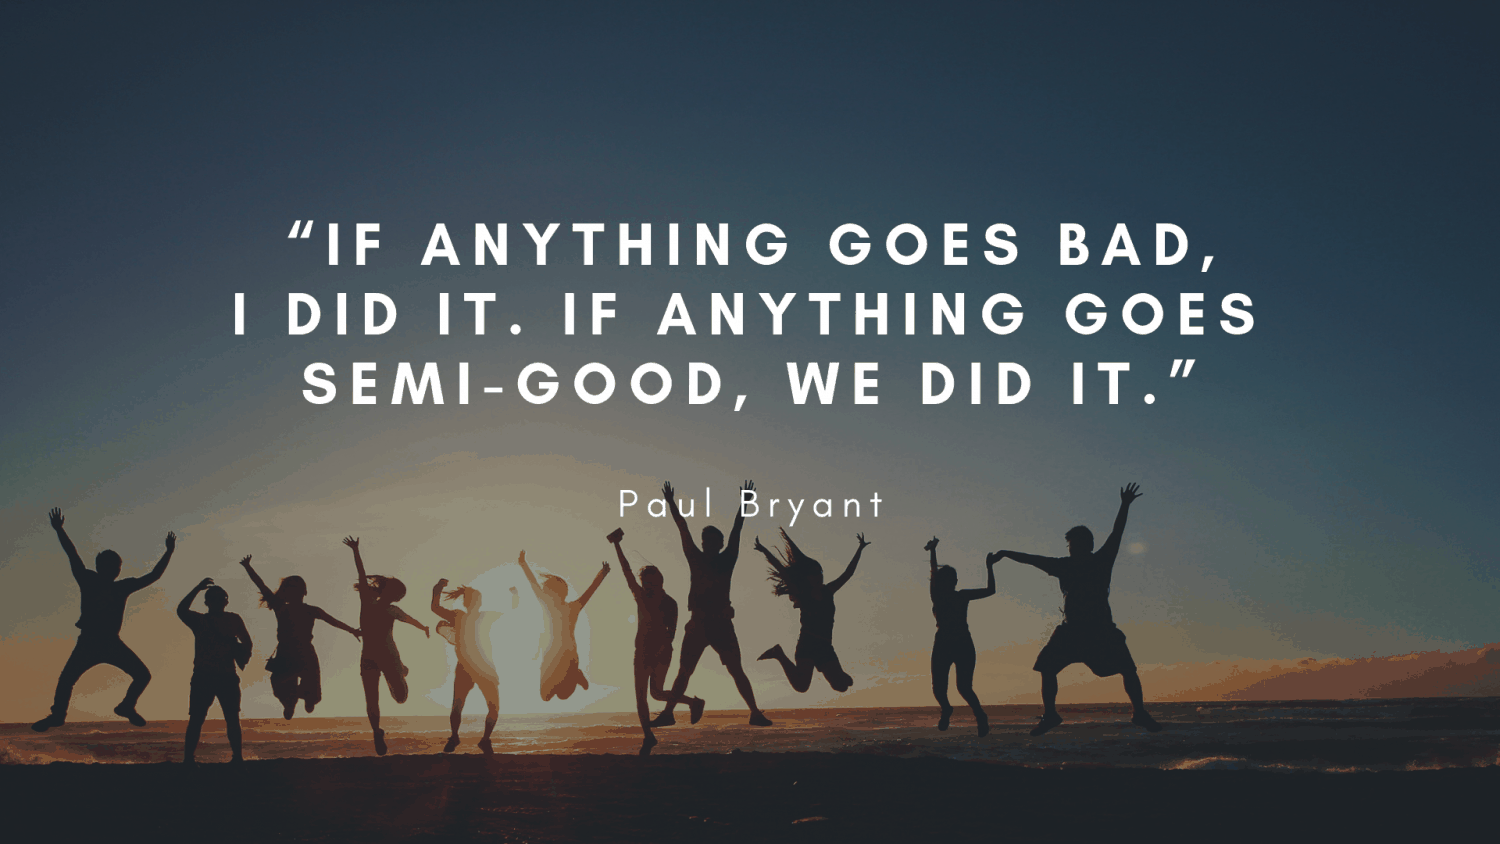 if anything goes bad, i did it. if anything goes semi-good, we did it. paul bryant